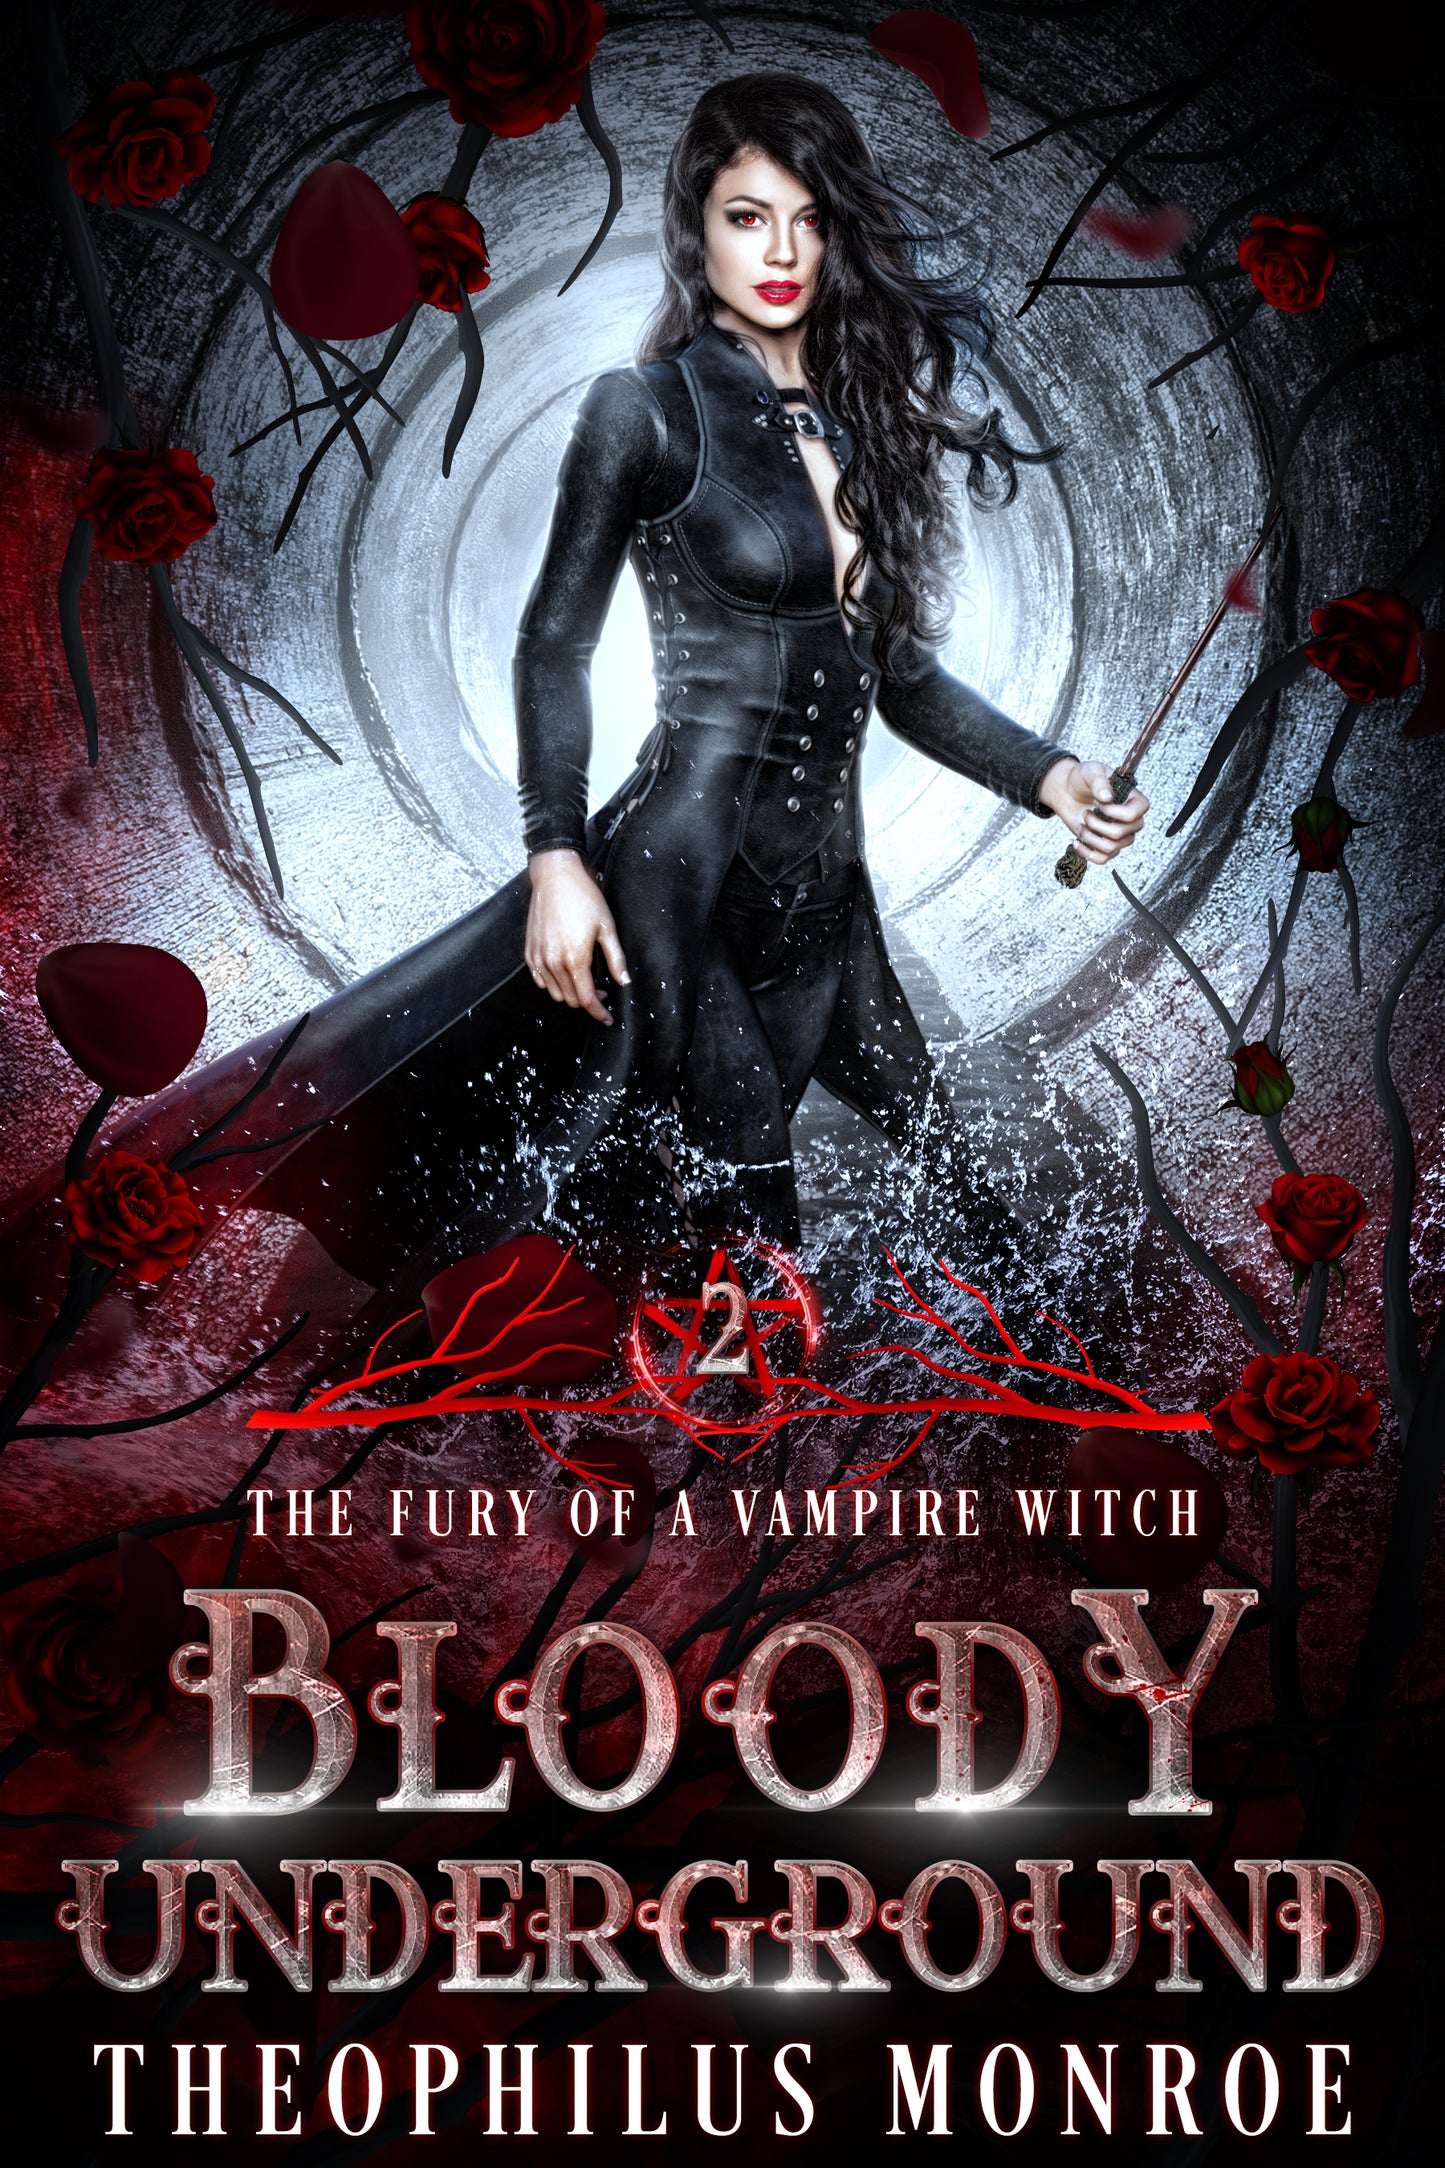 Bloody Underground (The Fury of a Vampire Witch #2)